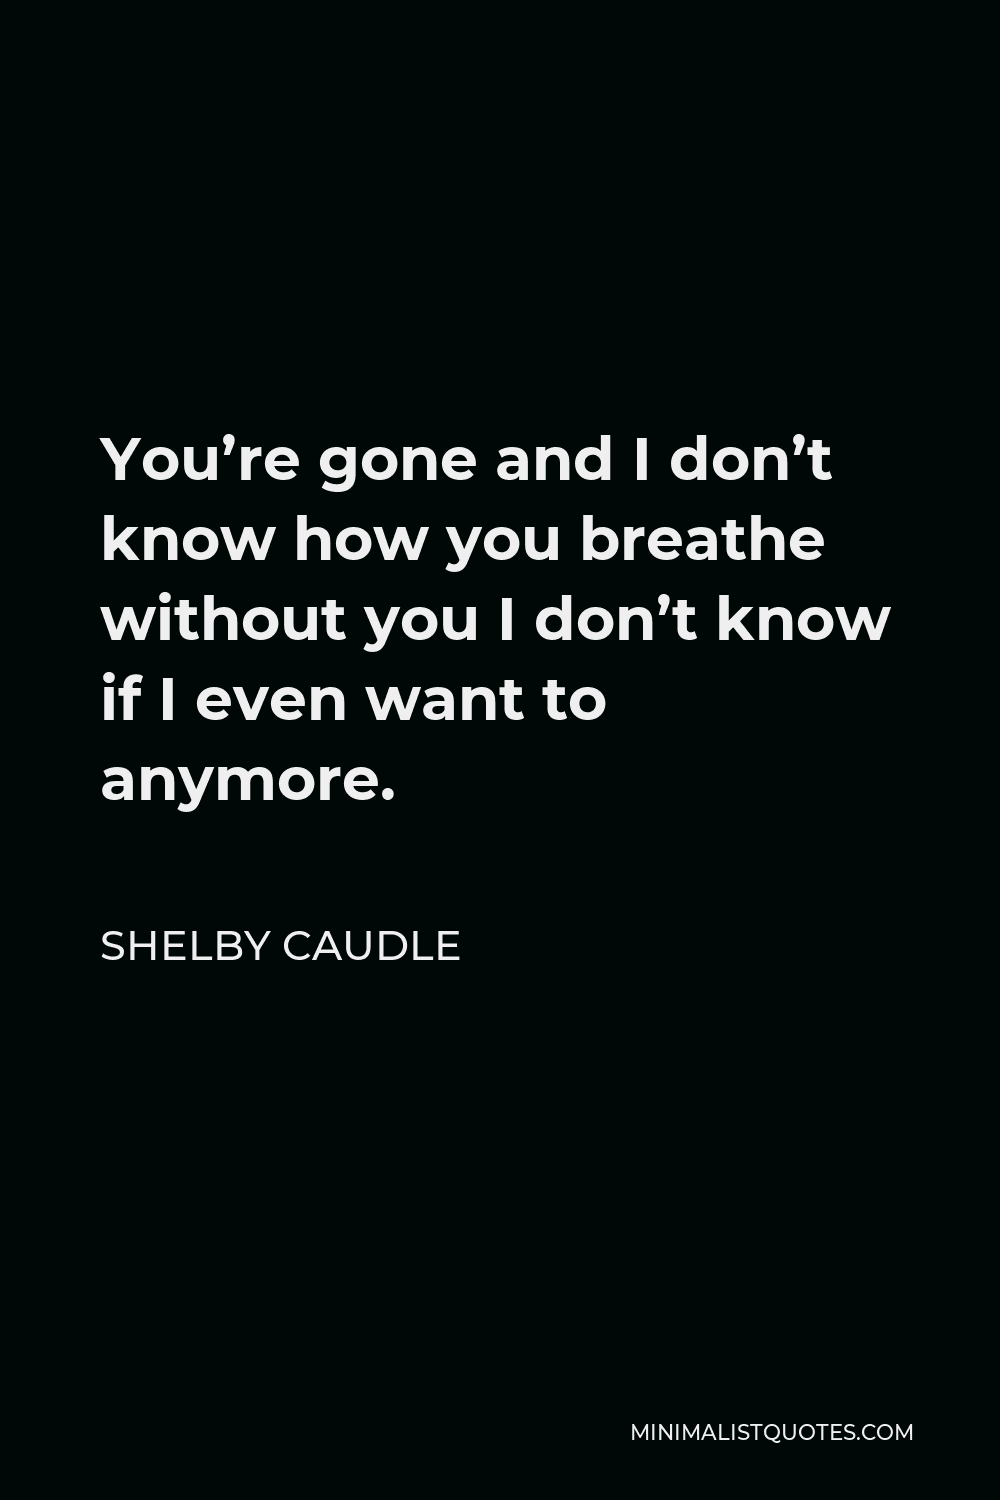 Shelby Caudle Quote - You’re gone and I don’t know how you breathe without you I don’t know if I even want to anymore.